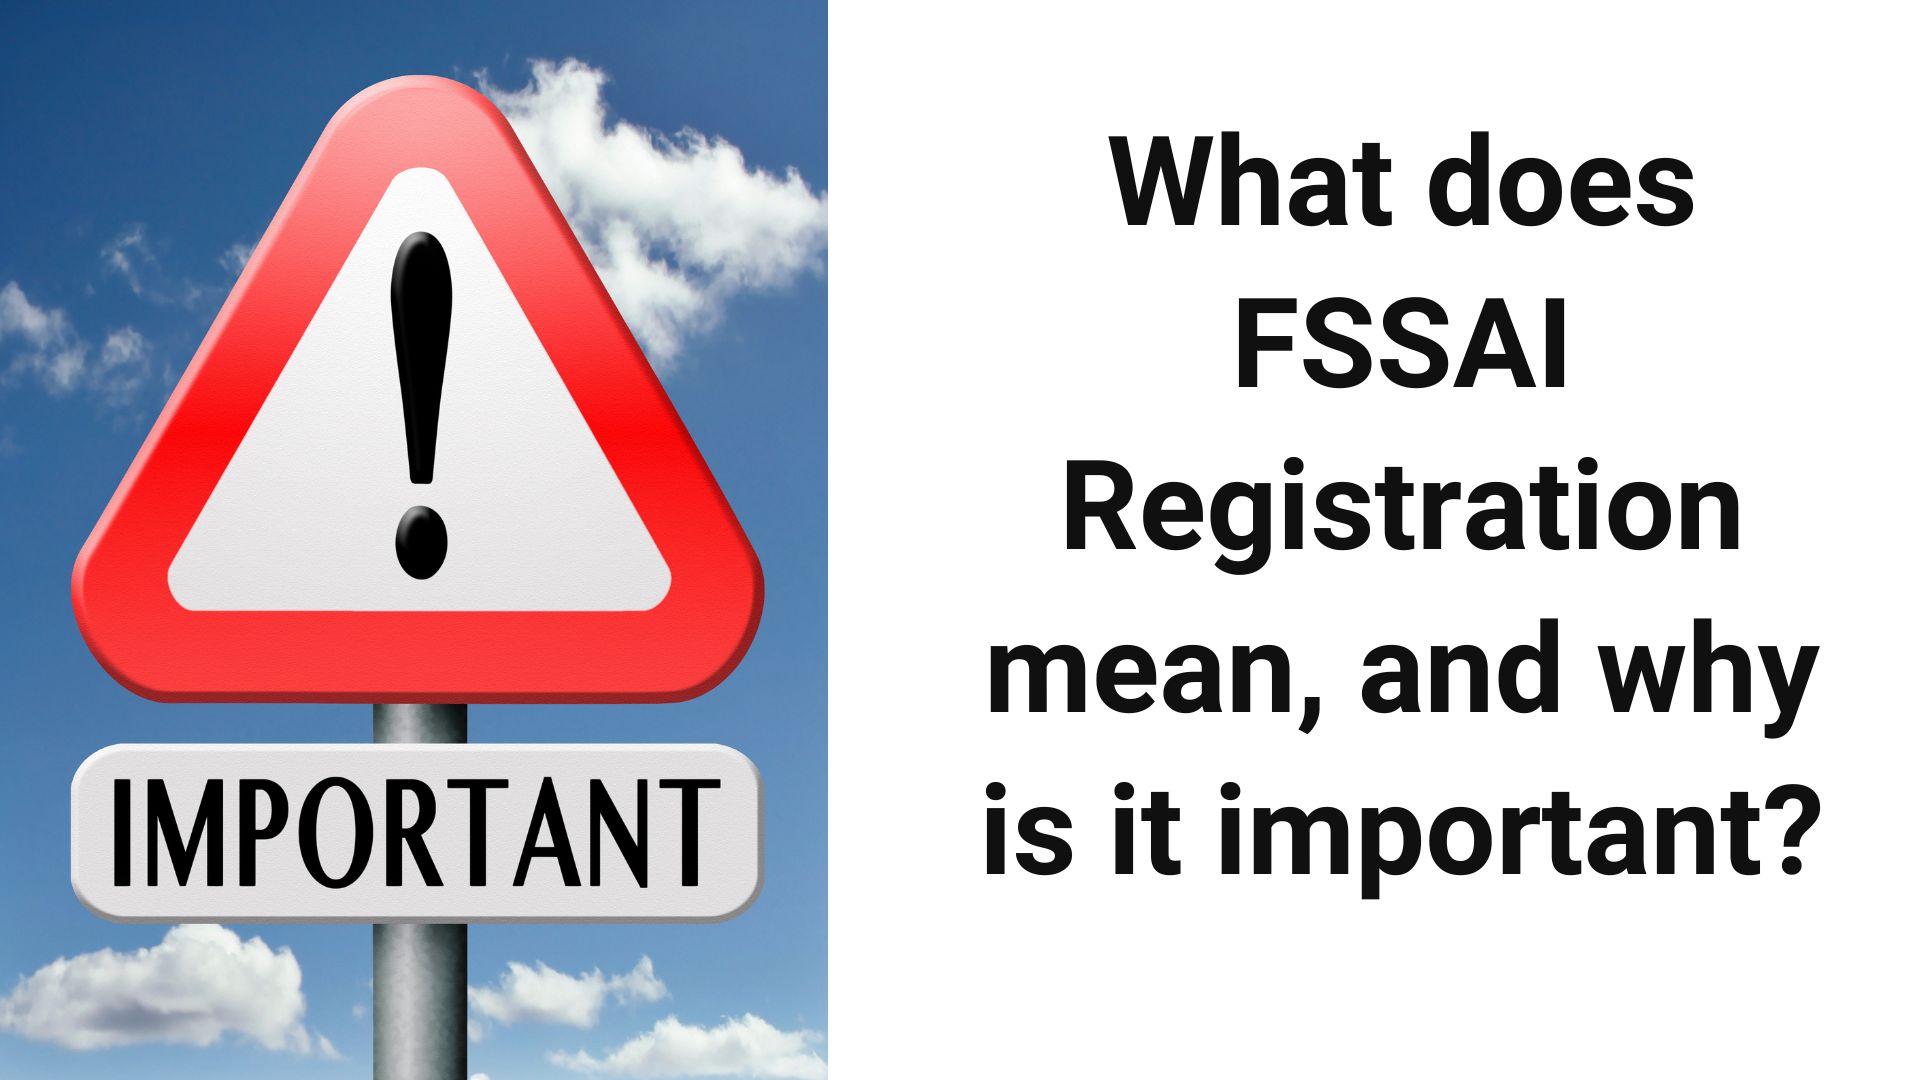 What does FSSAI Registration mean and why is it important